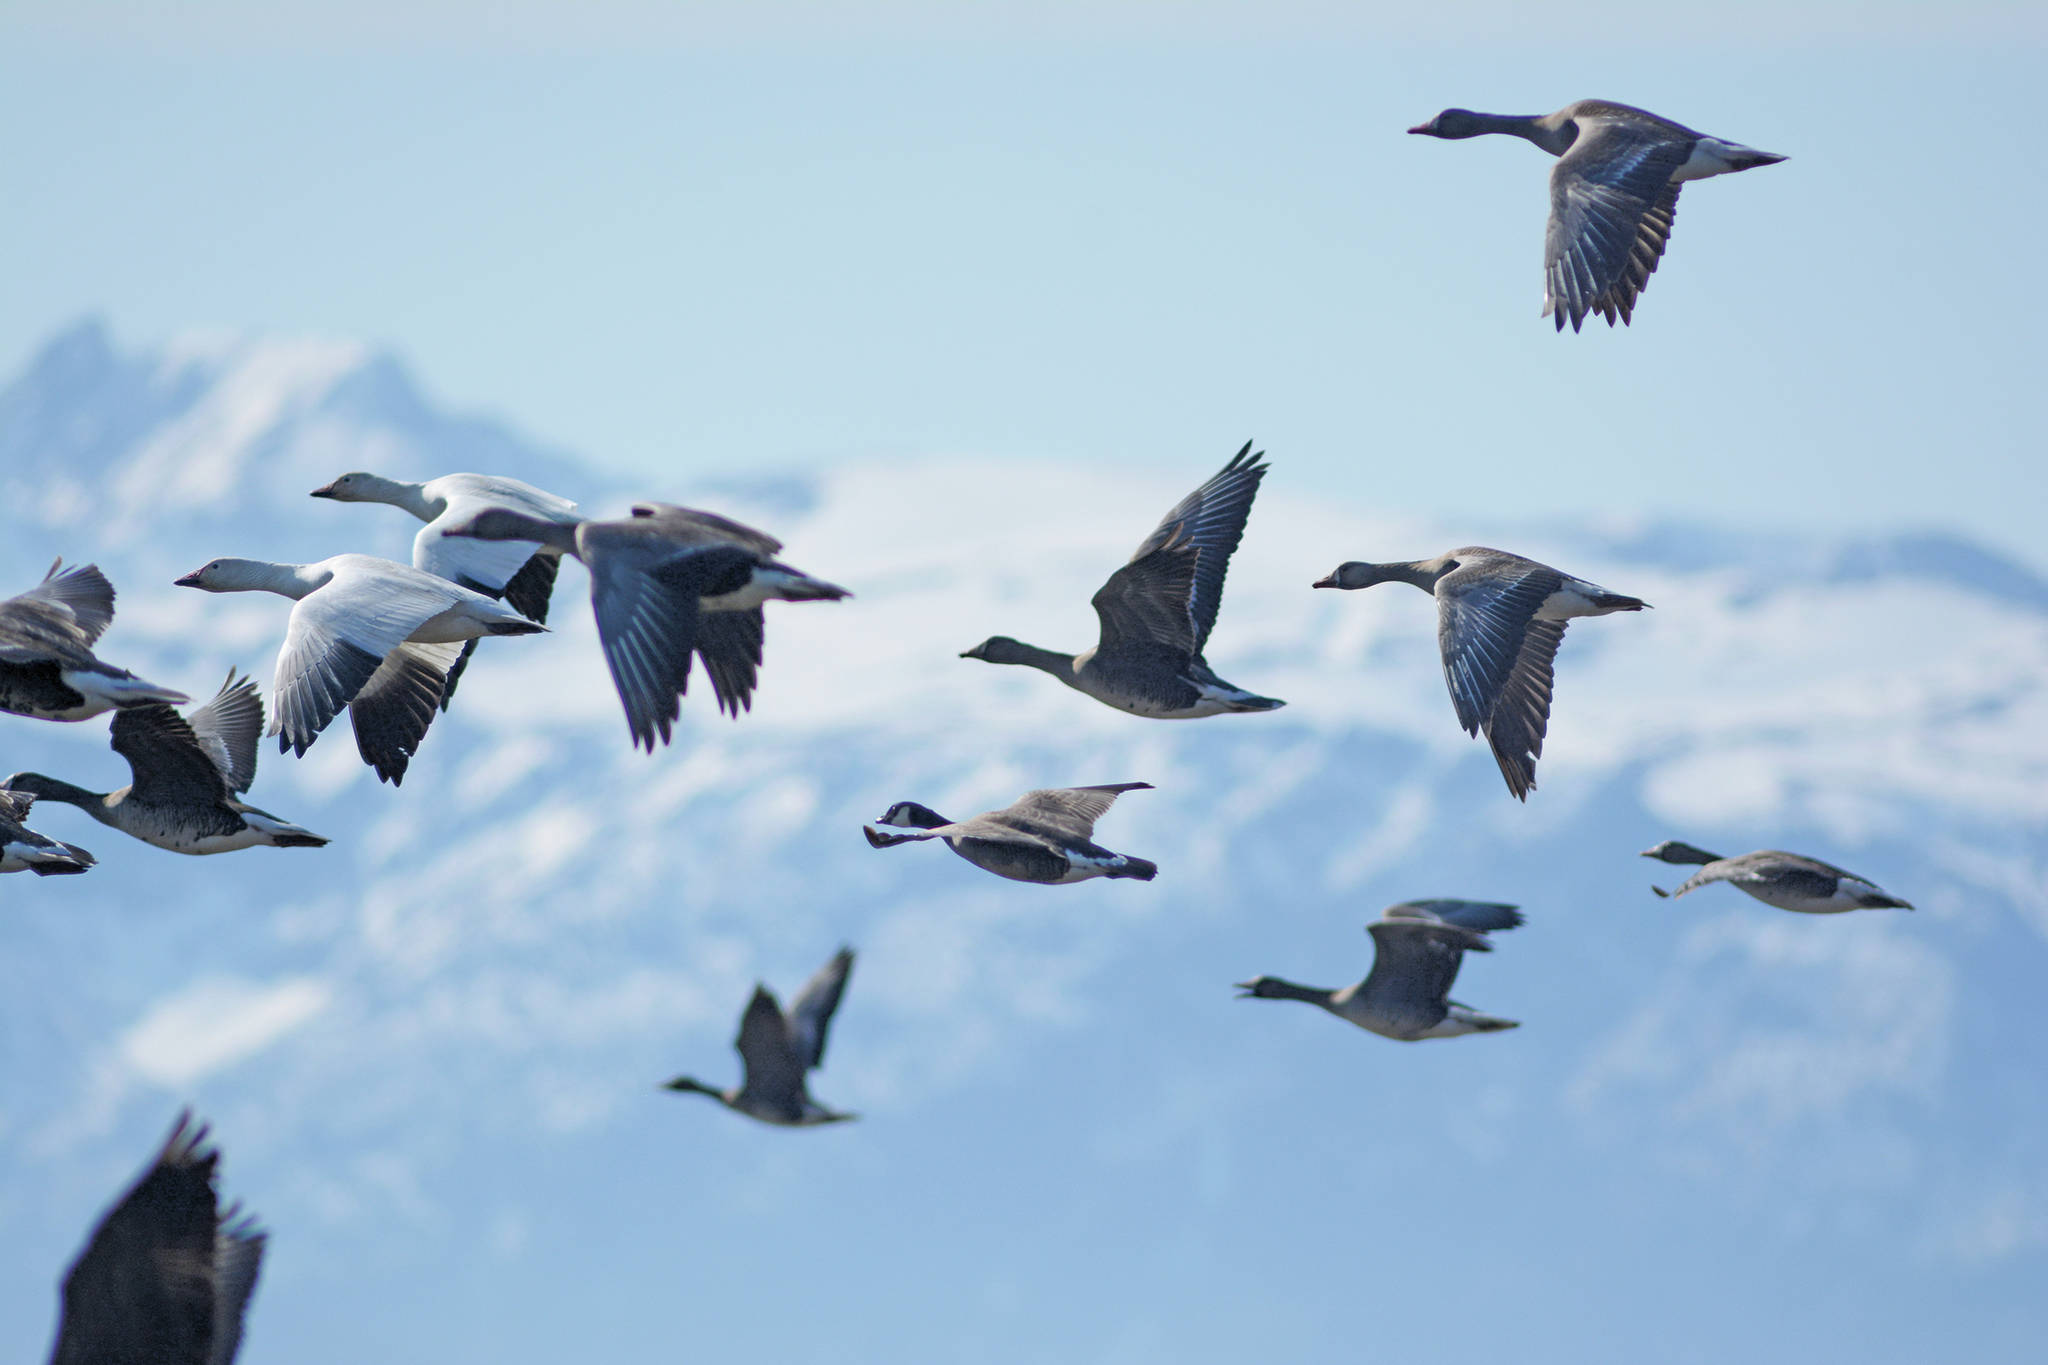 Snow geese, greater white fronted geese and cackling Canada geese fly on Saturday, May 2, 2020, over the Mariner Park Slough in Homer, Alaska. (Photo by Michael Armstrong/Homer News)